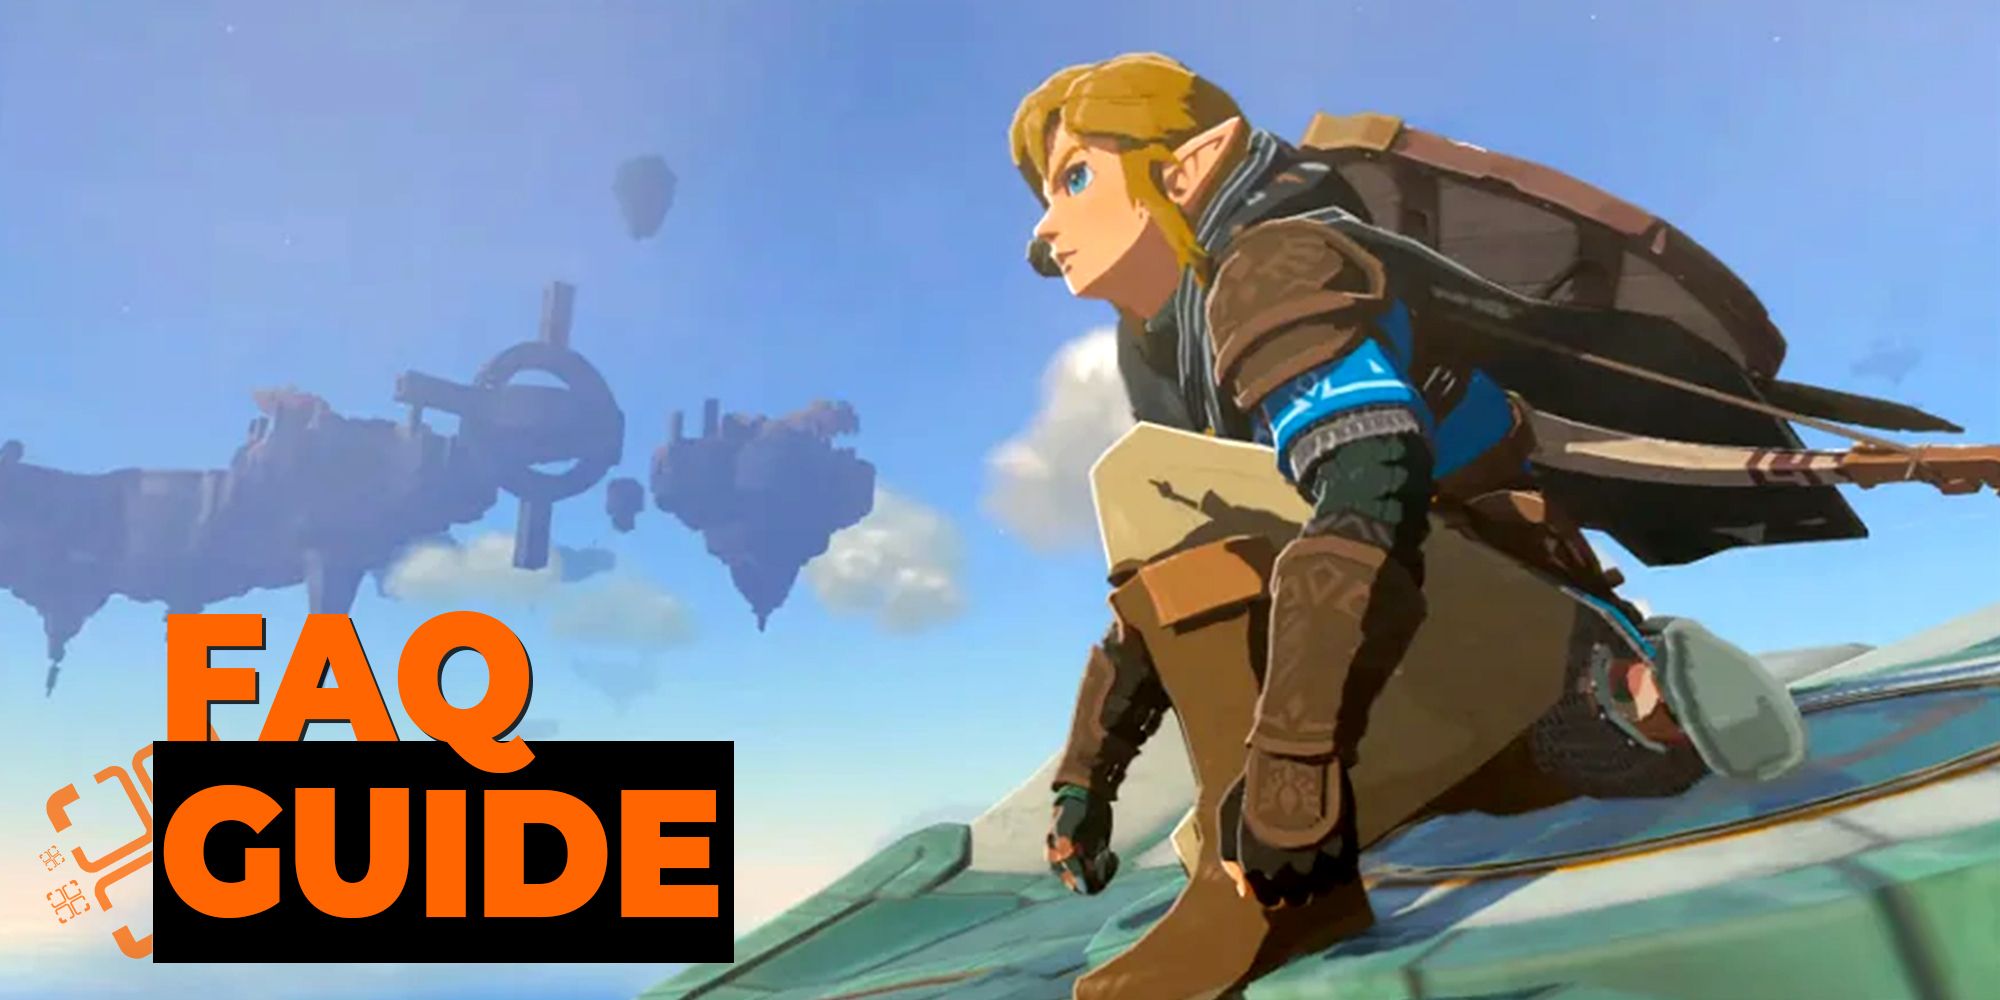 The Legend of Zelda Tears of the Kingdom: Link crouches on a Wing device high in the sky